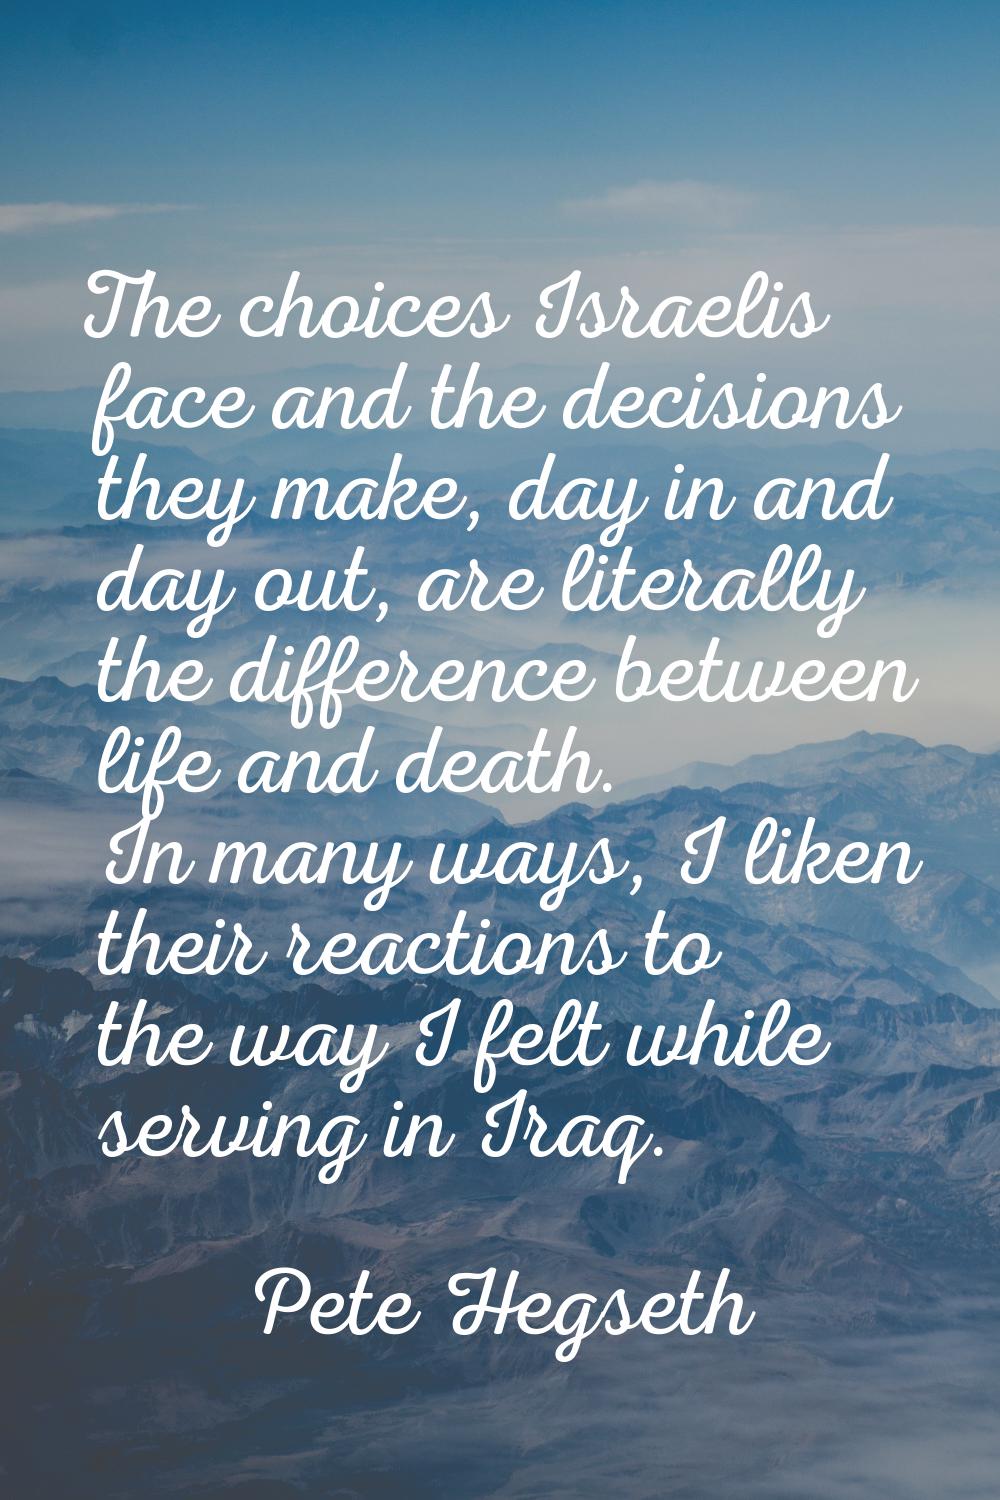 The choices Israelis face and the decisions they make, day in and day out, are literally the differ